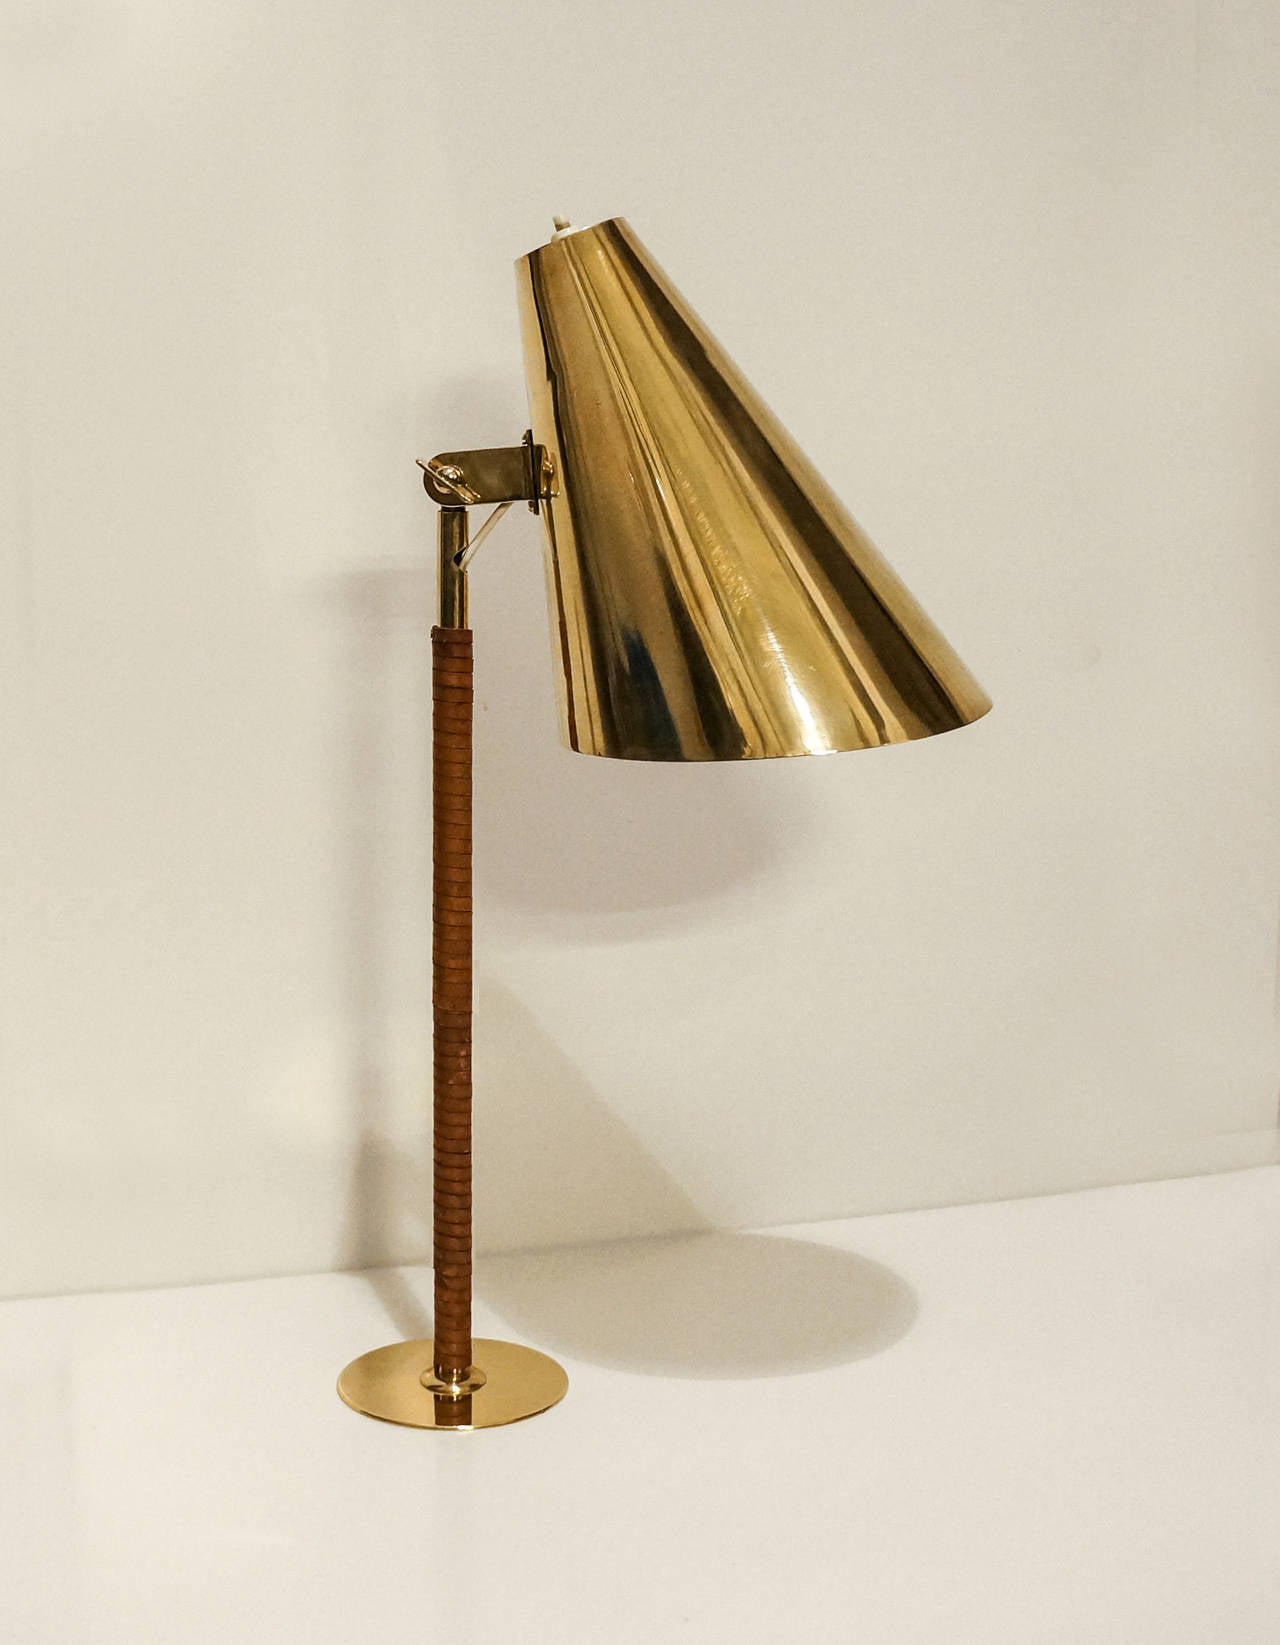 Paavo Tynell, Taito Oy.

Rare table lamp,

Finland, circa 1950s.

Solid brass and leather wrapping.
Measures: 50 H x 24 W cm.

Rare table lamp designed for the Columbia-café in Helsinki, early 1950s. Paavo Tynell designed lighting for